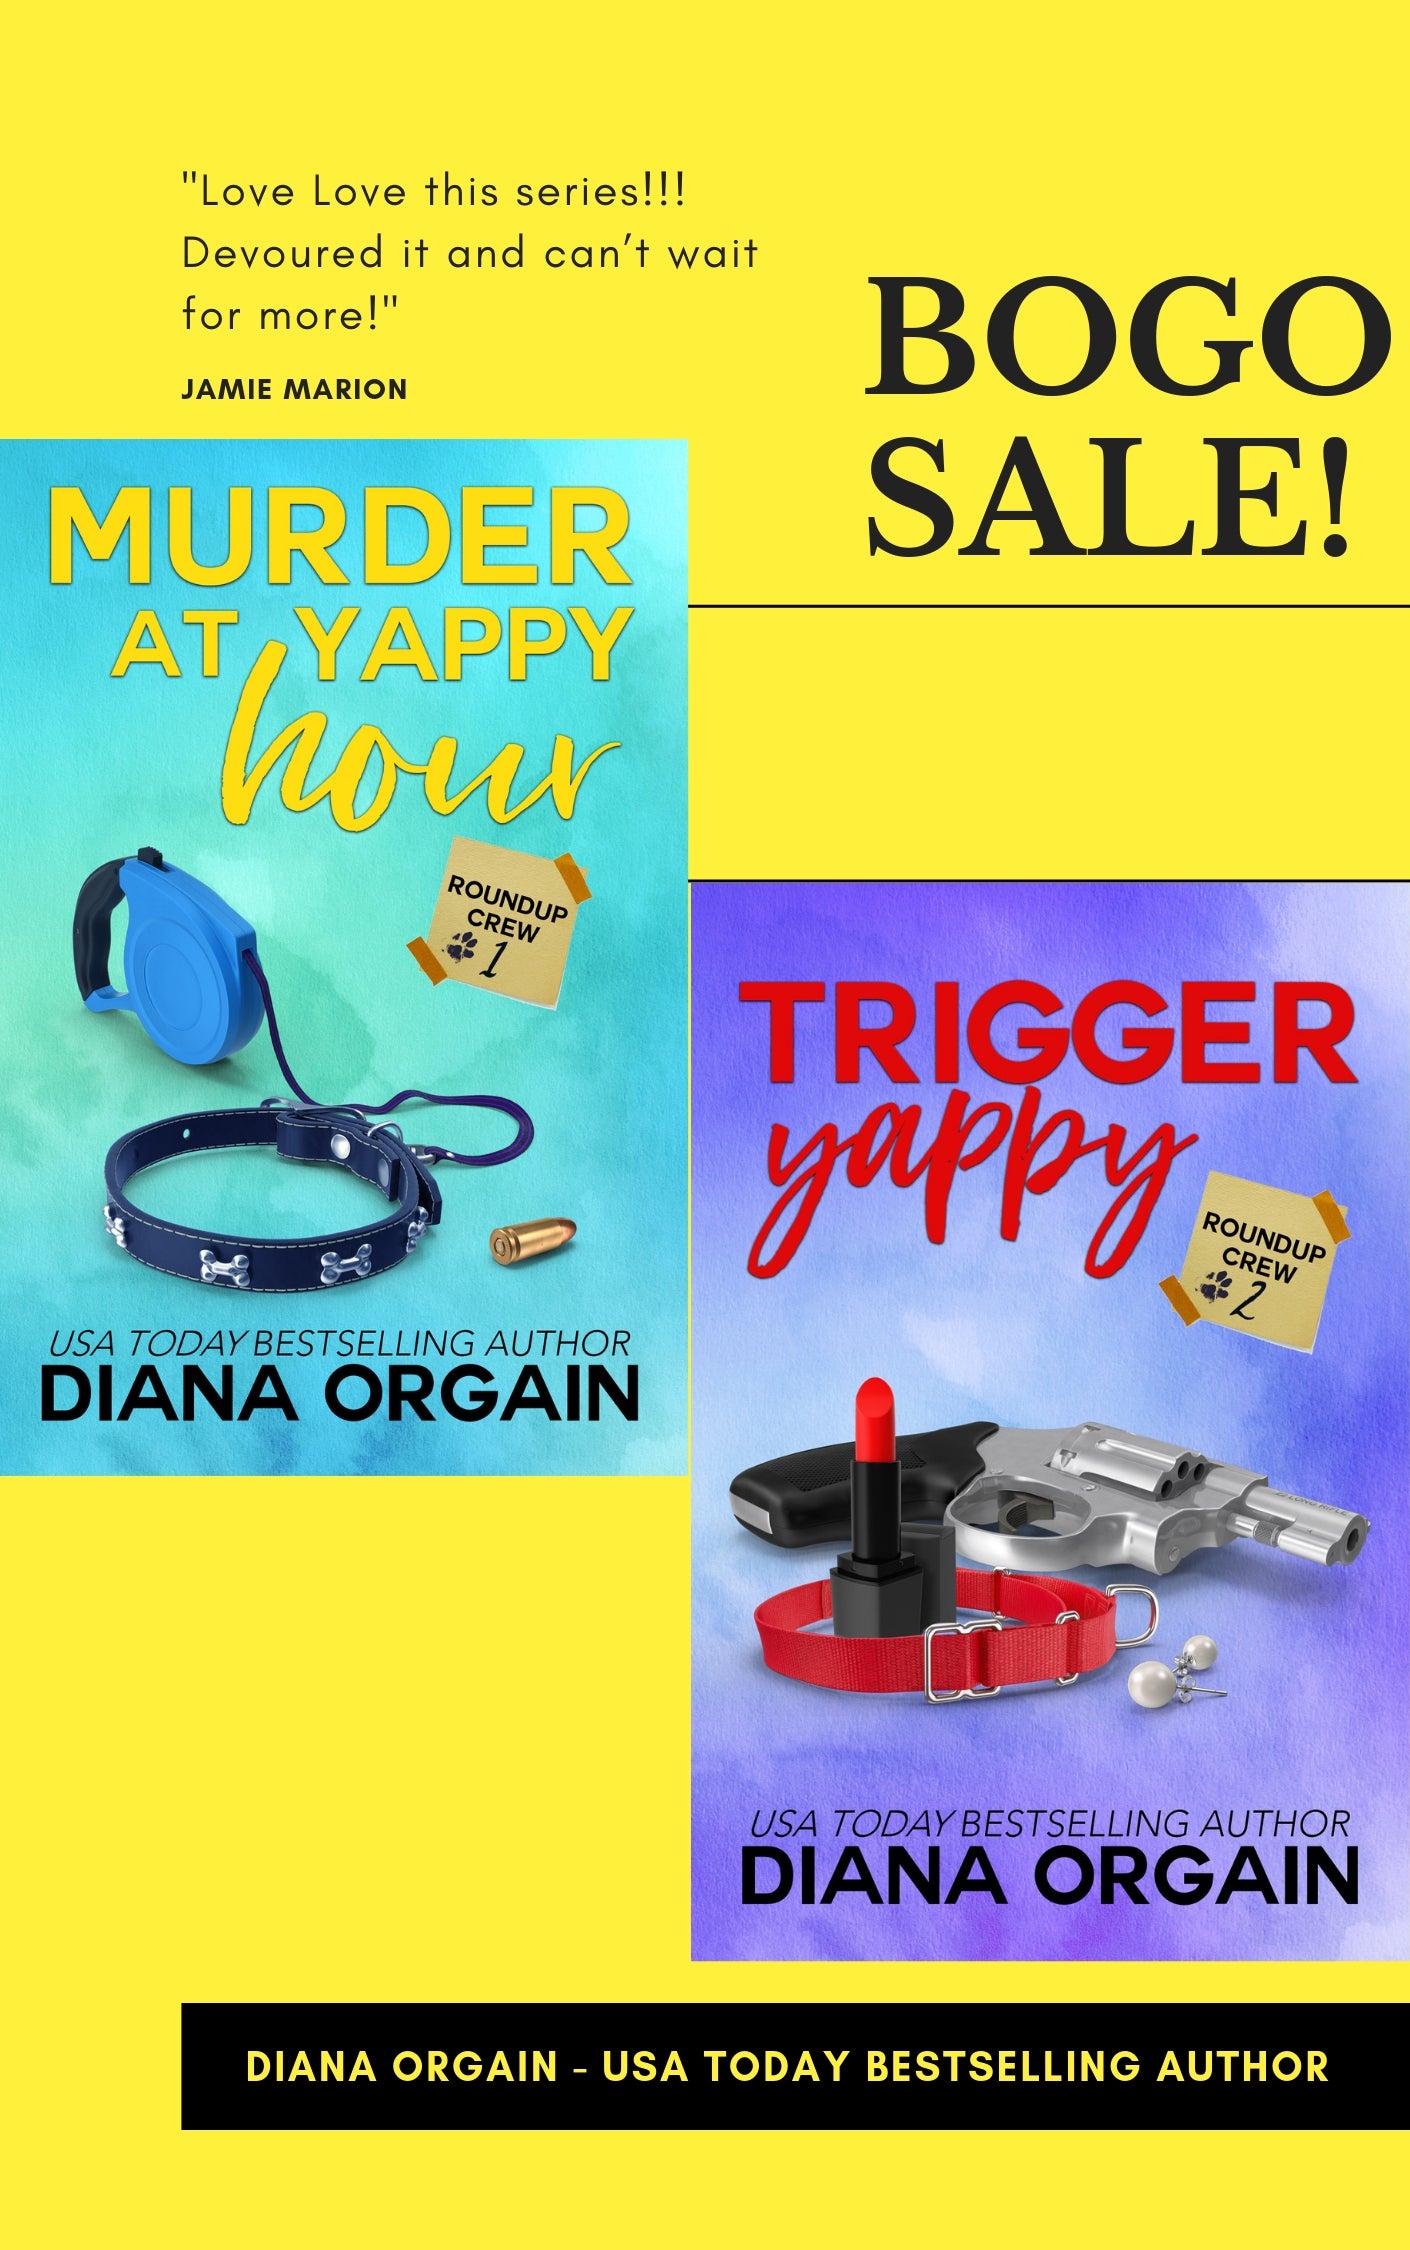 Murder at Yappy Hour and Trigger Yappy EBOOK (BOGO!)